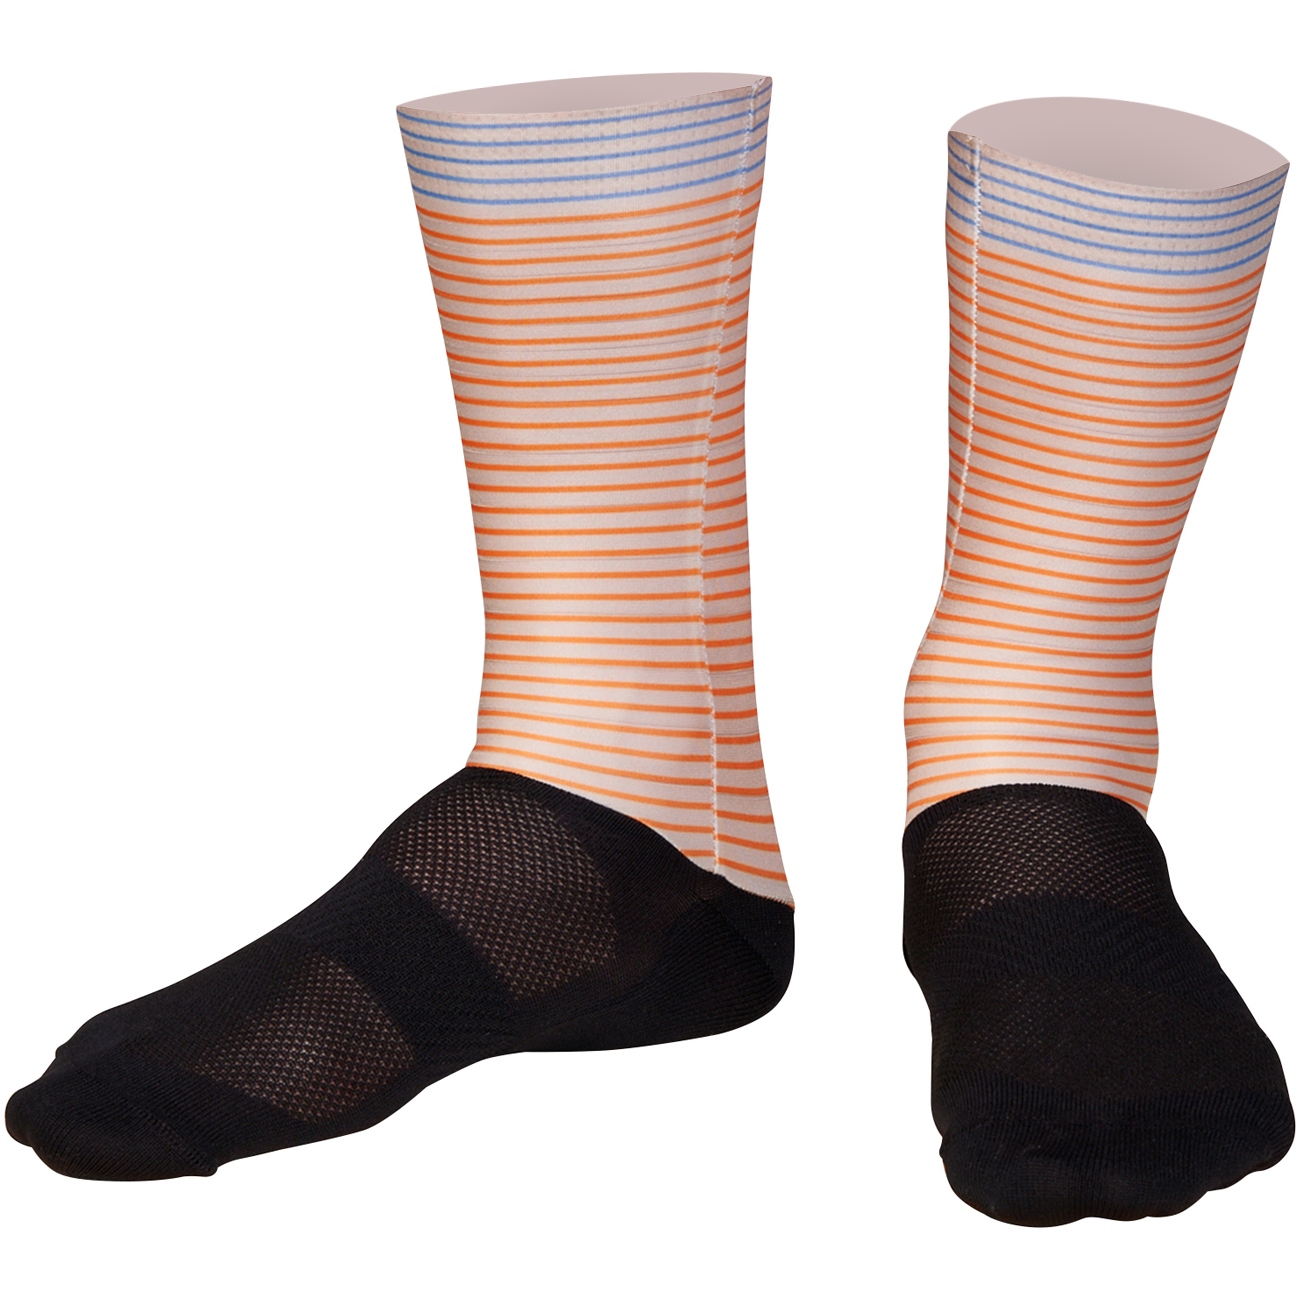 Picture of Bioracer Technical Cycling Socks - Beach - sand